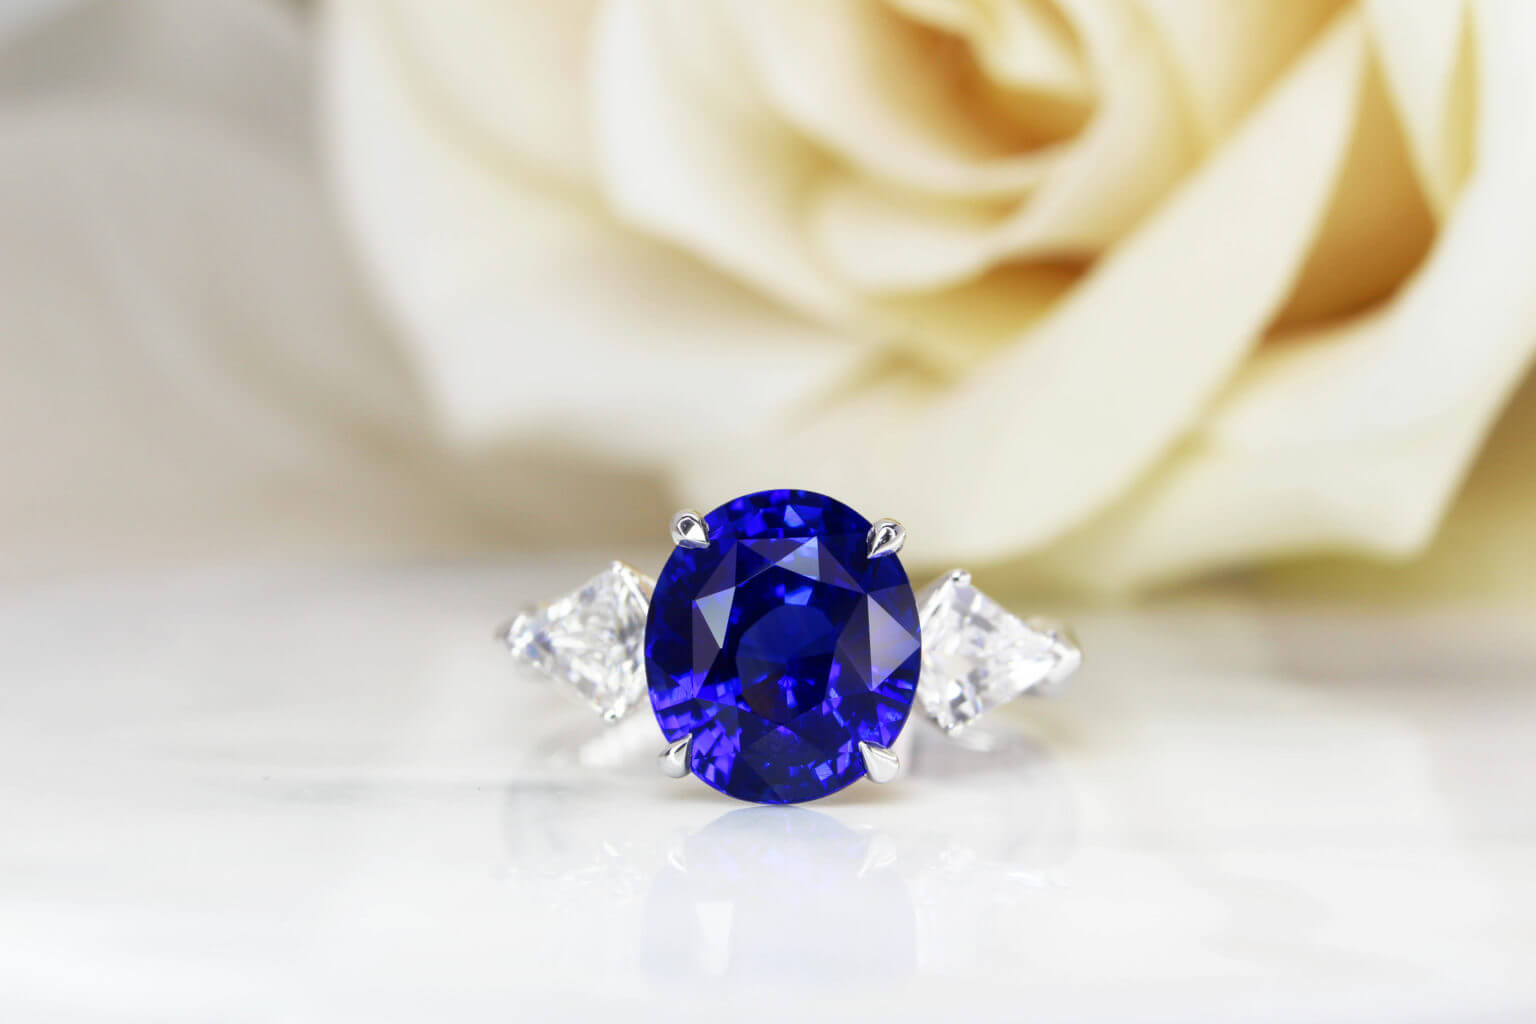 Blue Sapphire Diamond Ring - Customised Engagement Proposal Ring with ...